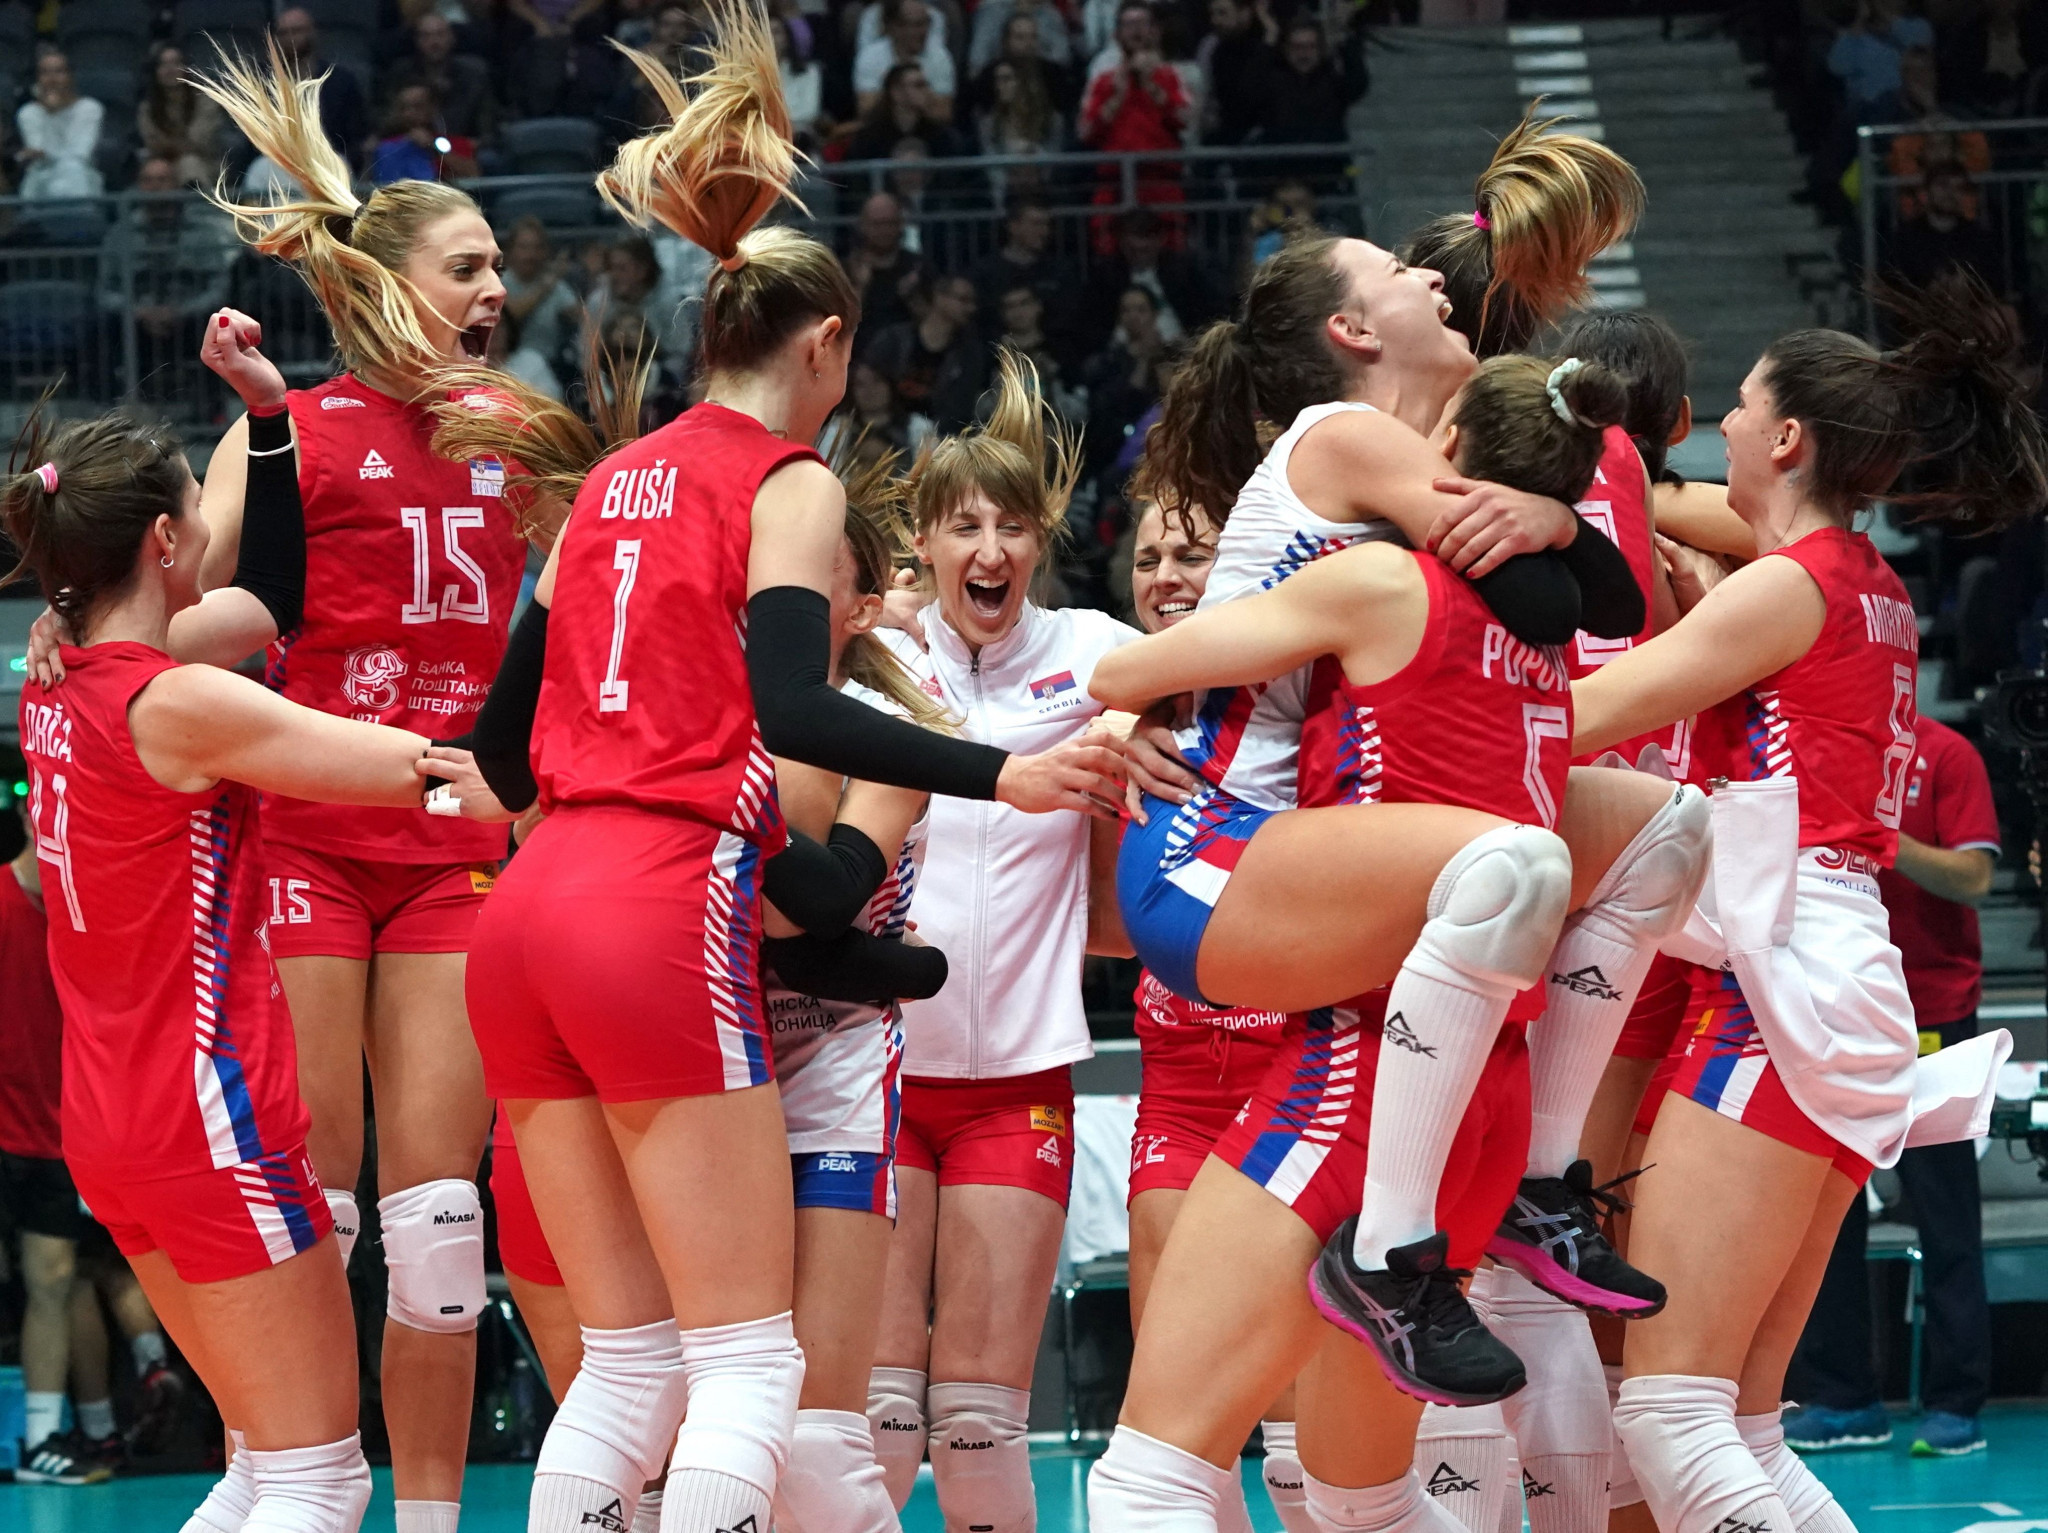 Serbia book place in Women's Volleyball World Championship final